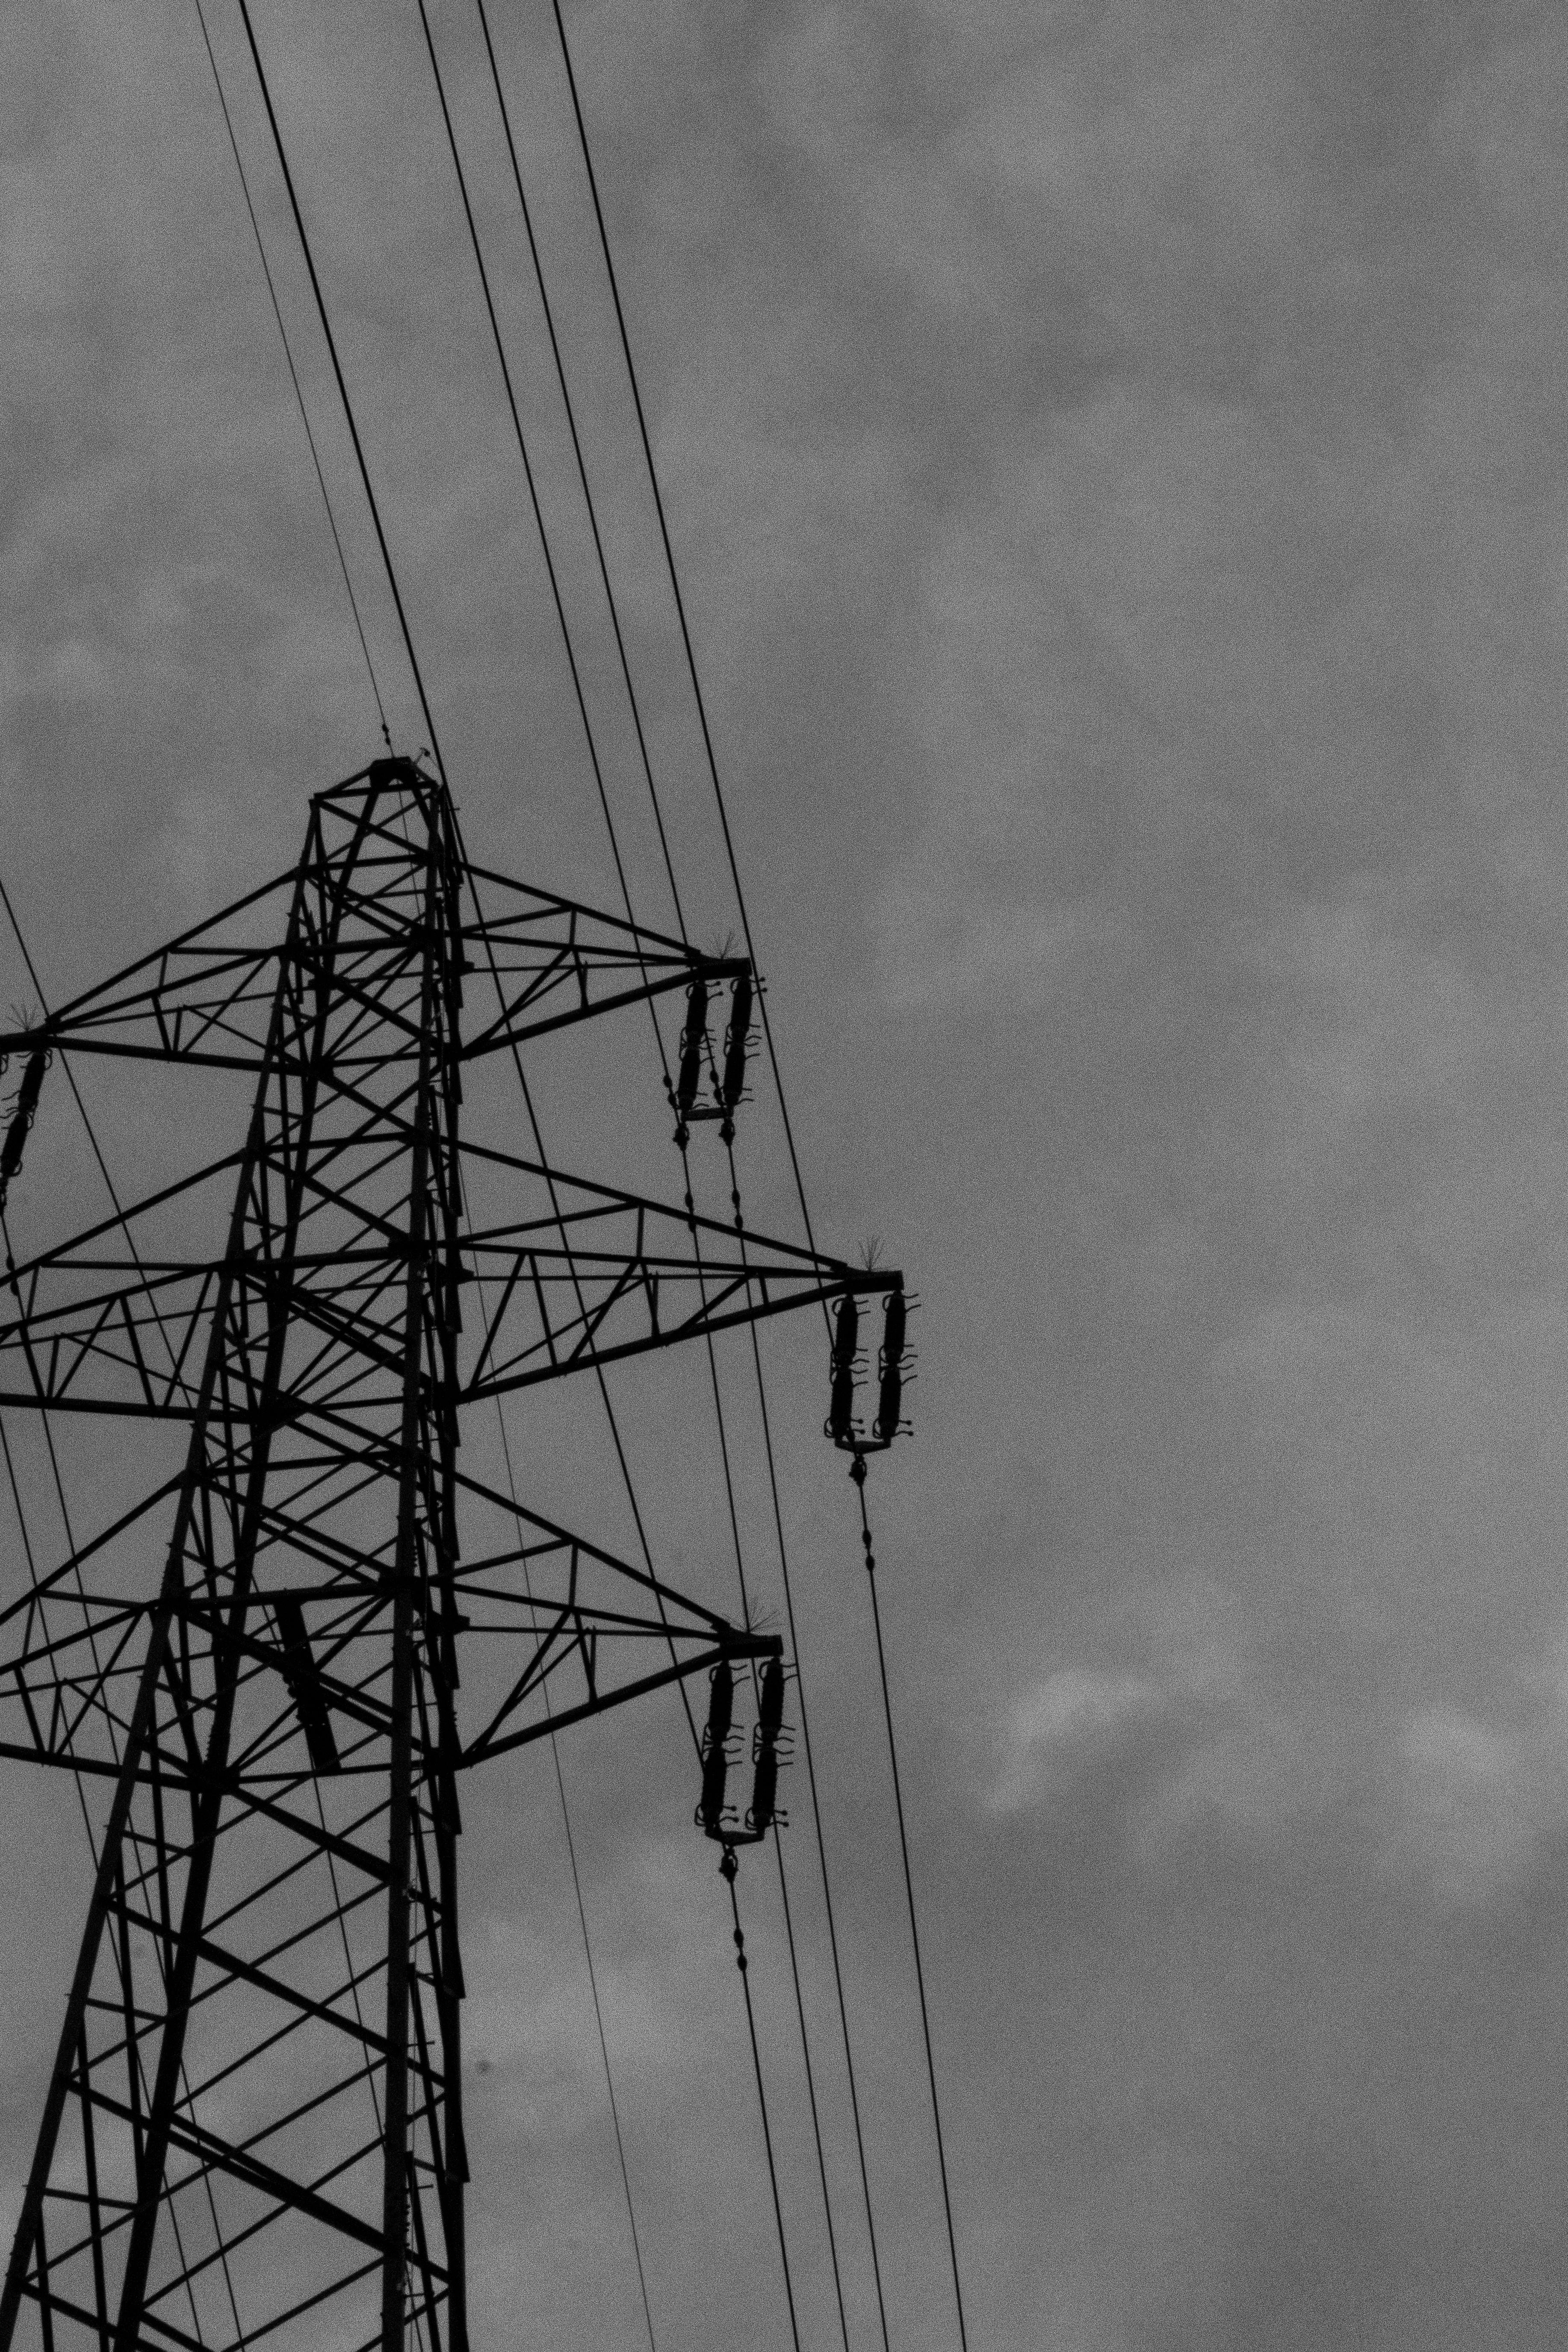 Free stock photo of black and white, Dark Sky, electric lines